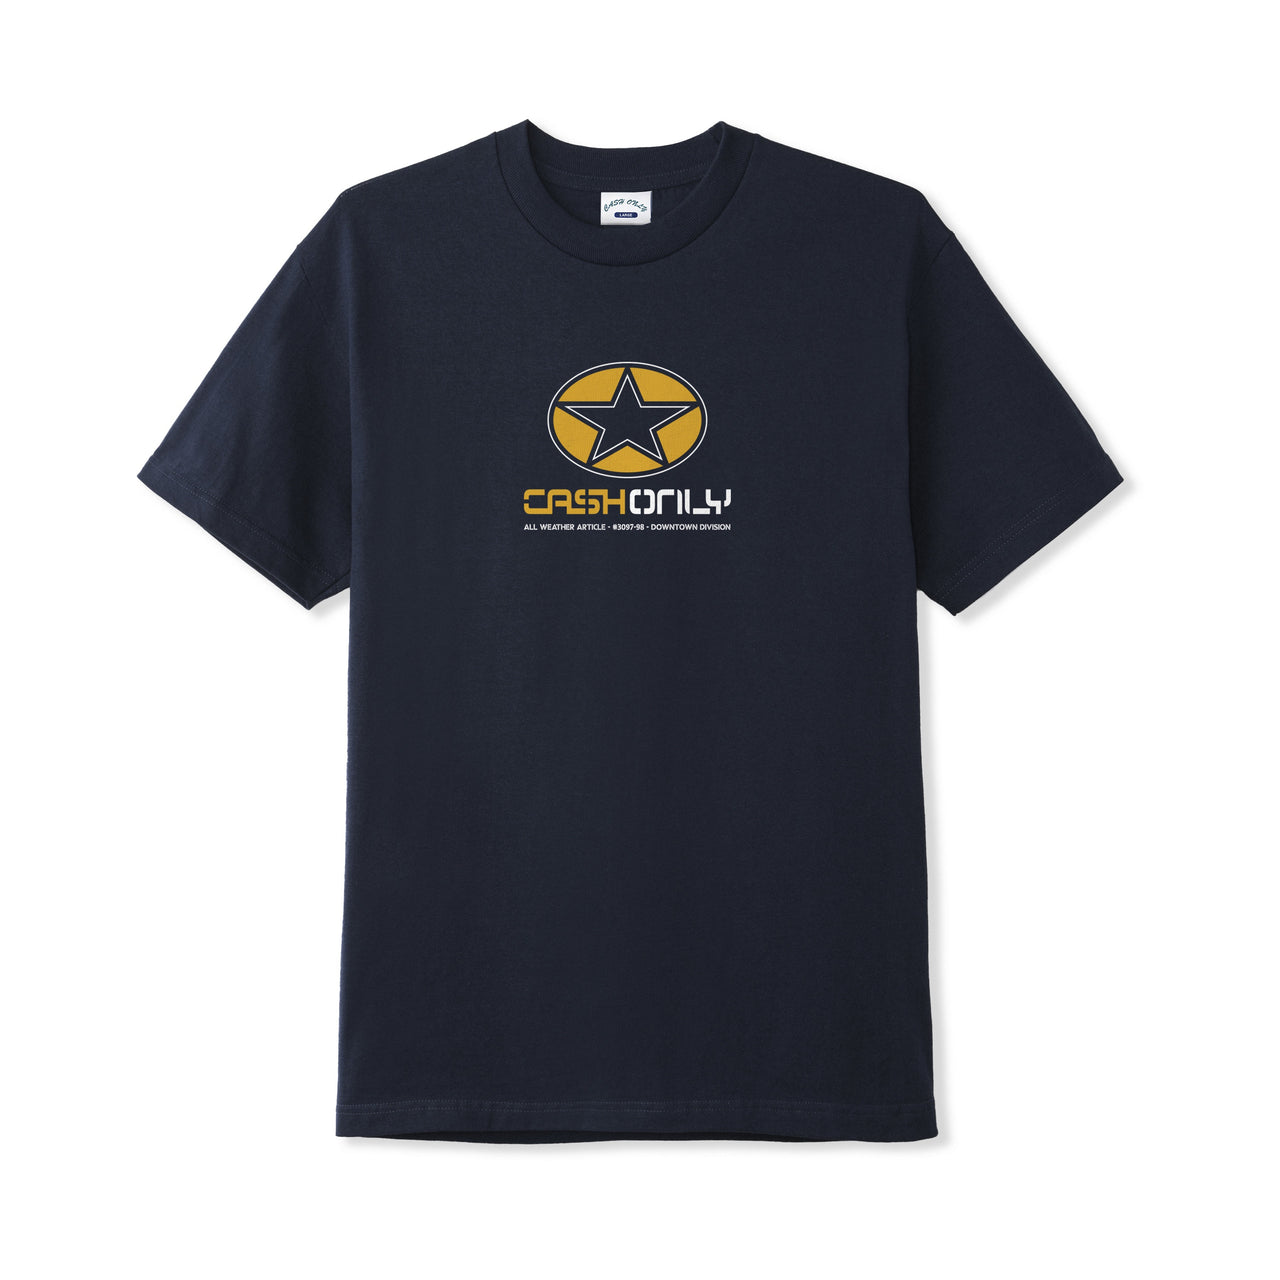 CASH ONLY - ALL WEATHER T-SHIRT - NAVY